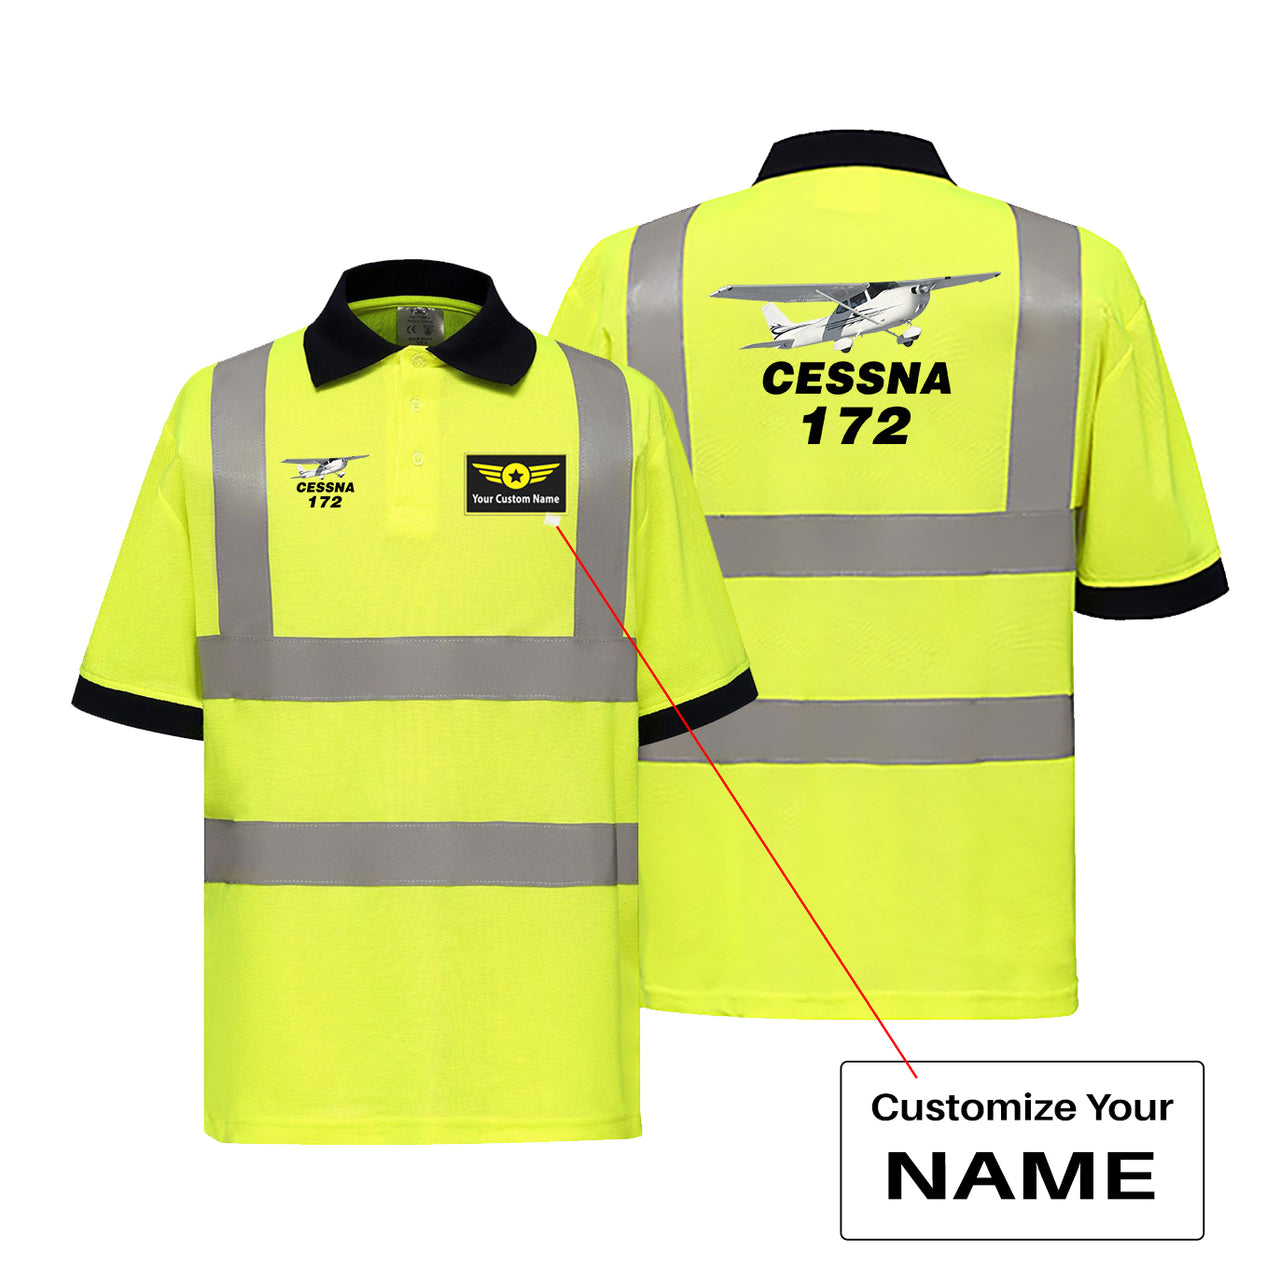 The Cessna 172 Designed Reflective Polo T-Shirts